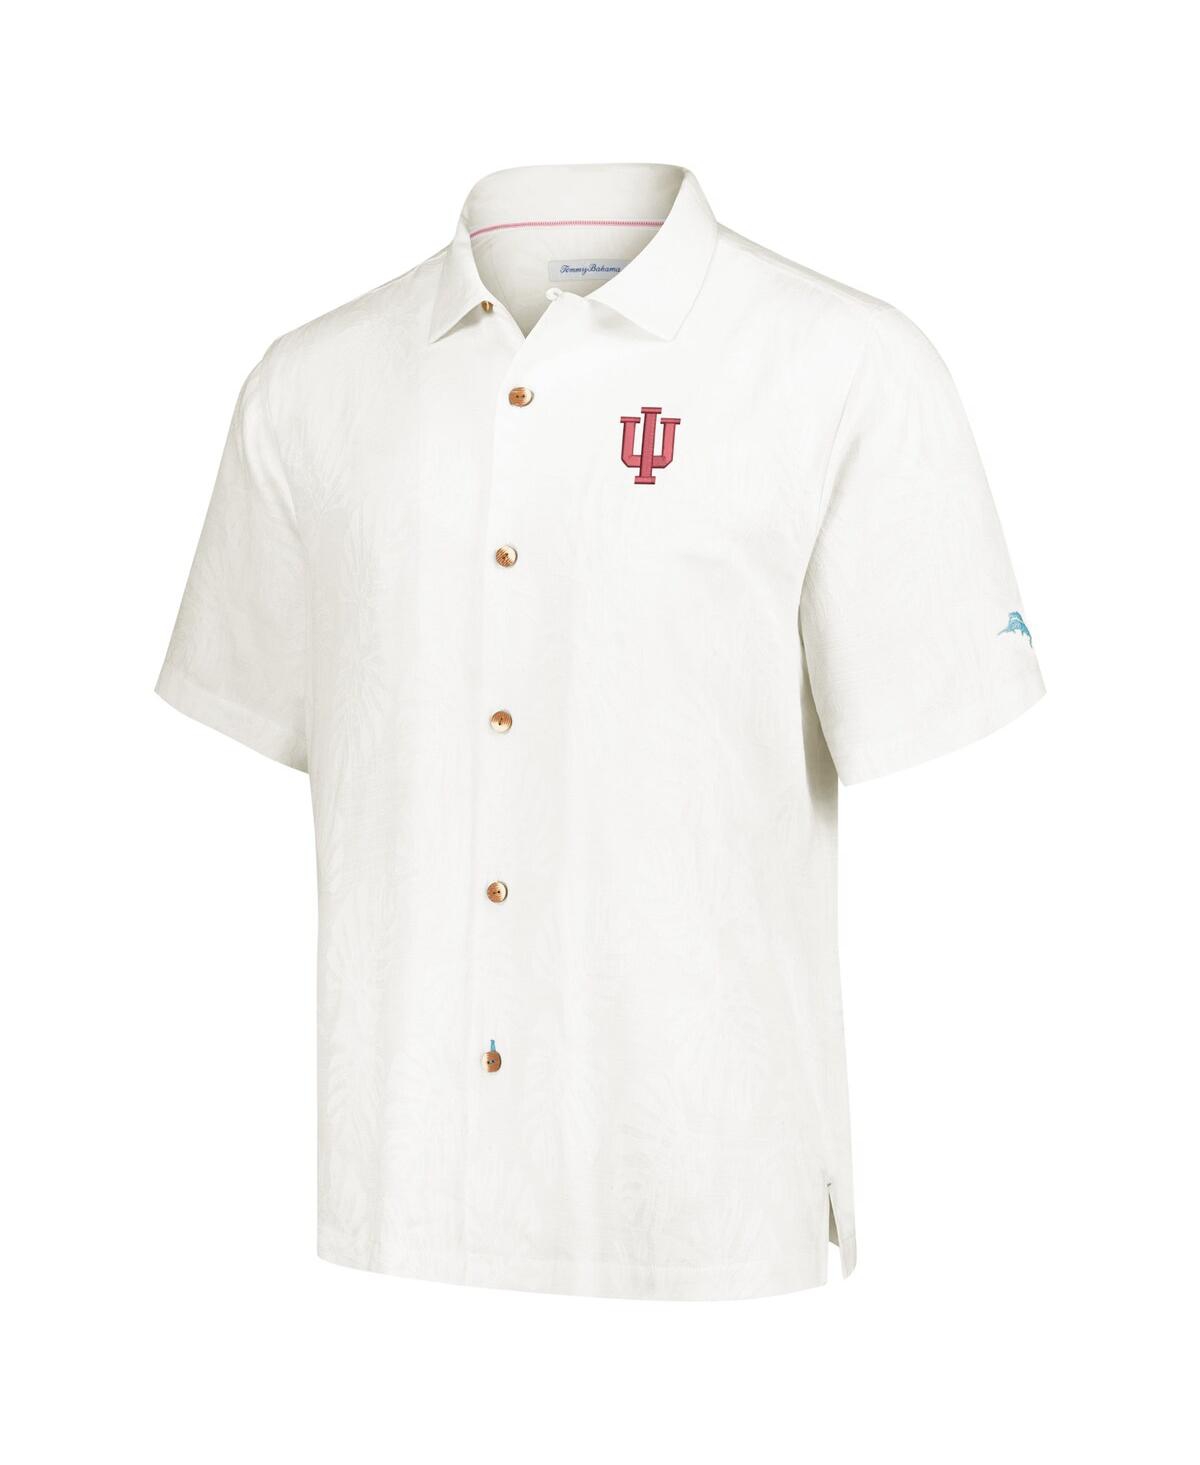 Shop Tommy Bahama Men's Cream Indiana Hoosiers Castaway Game Camp Button-up Shirt